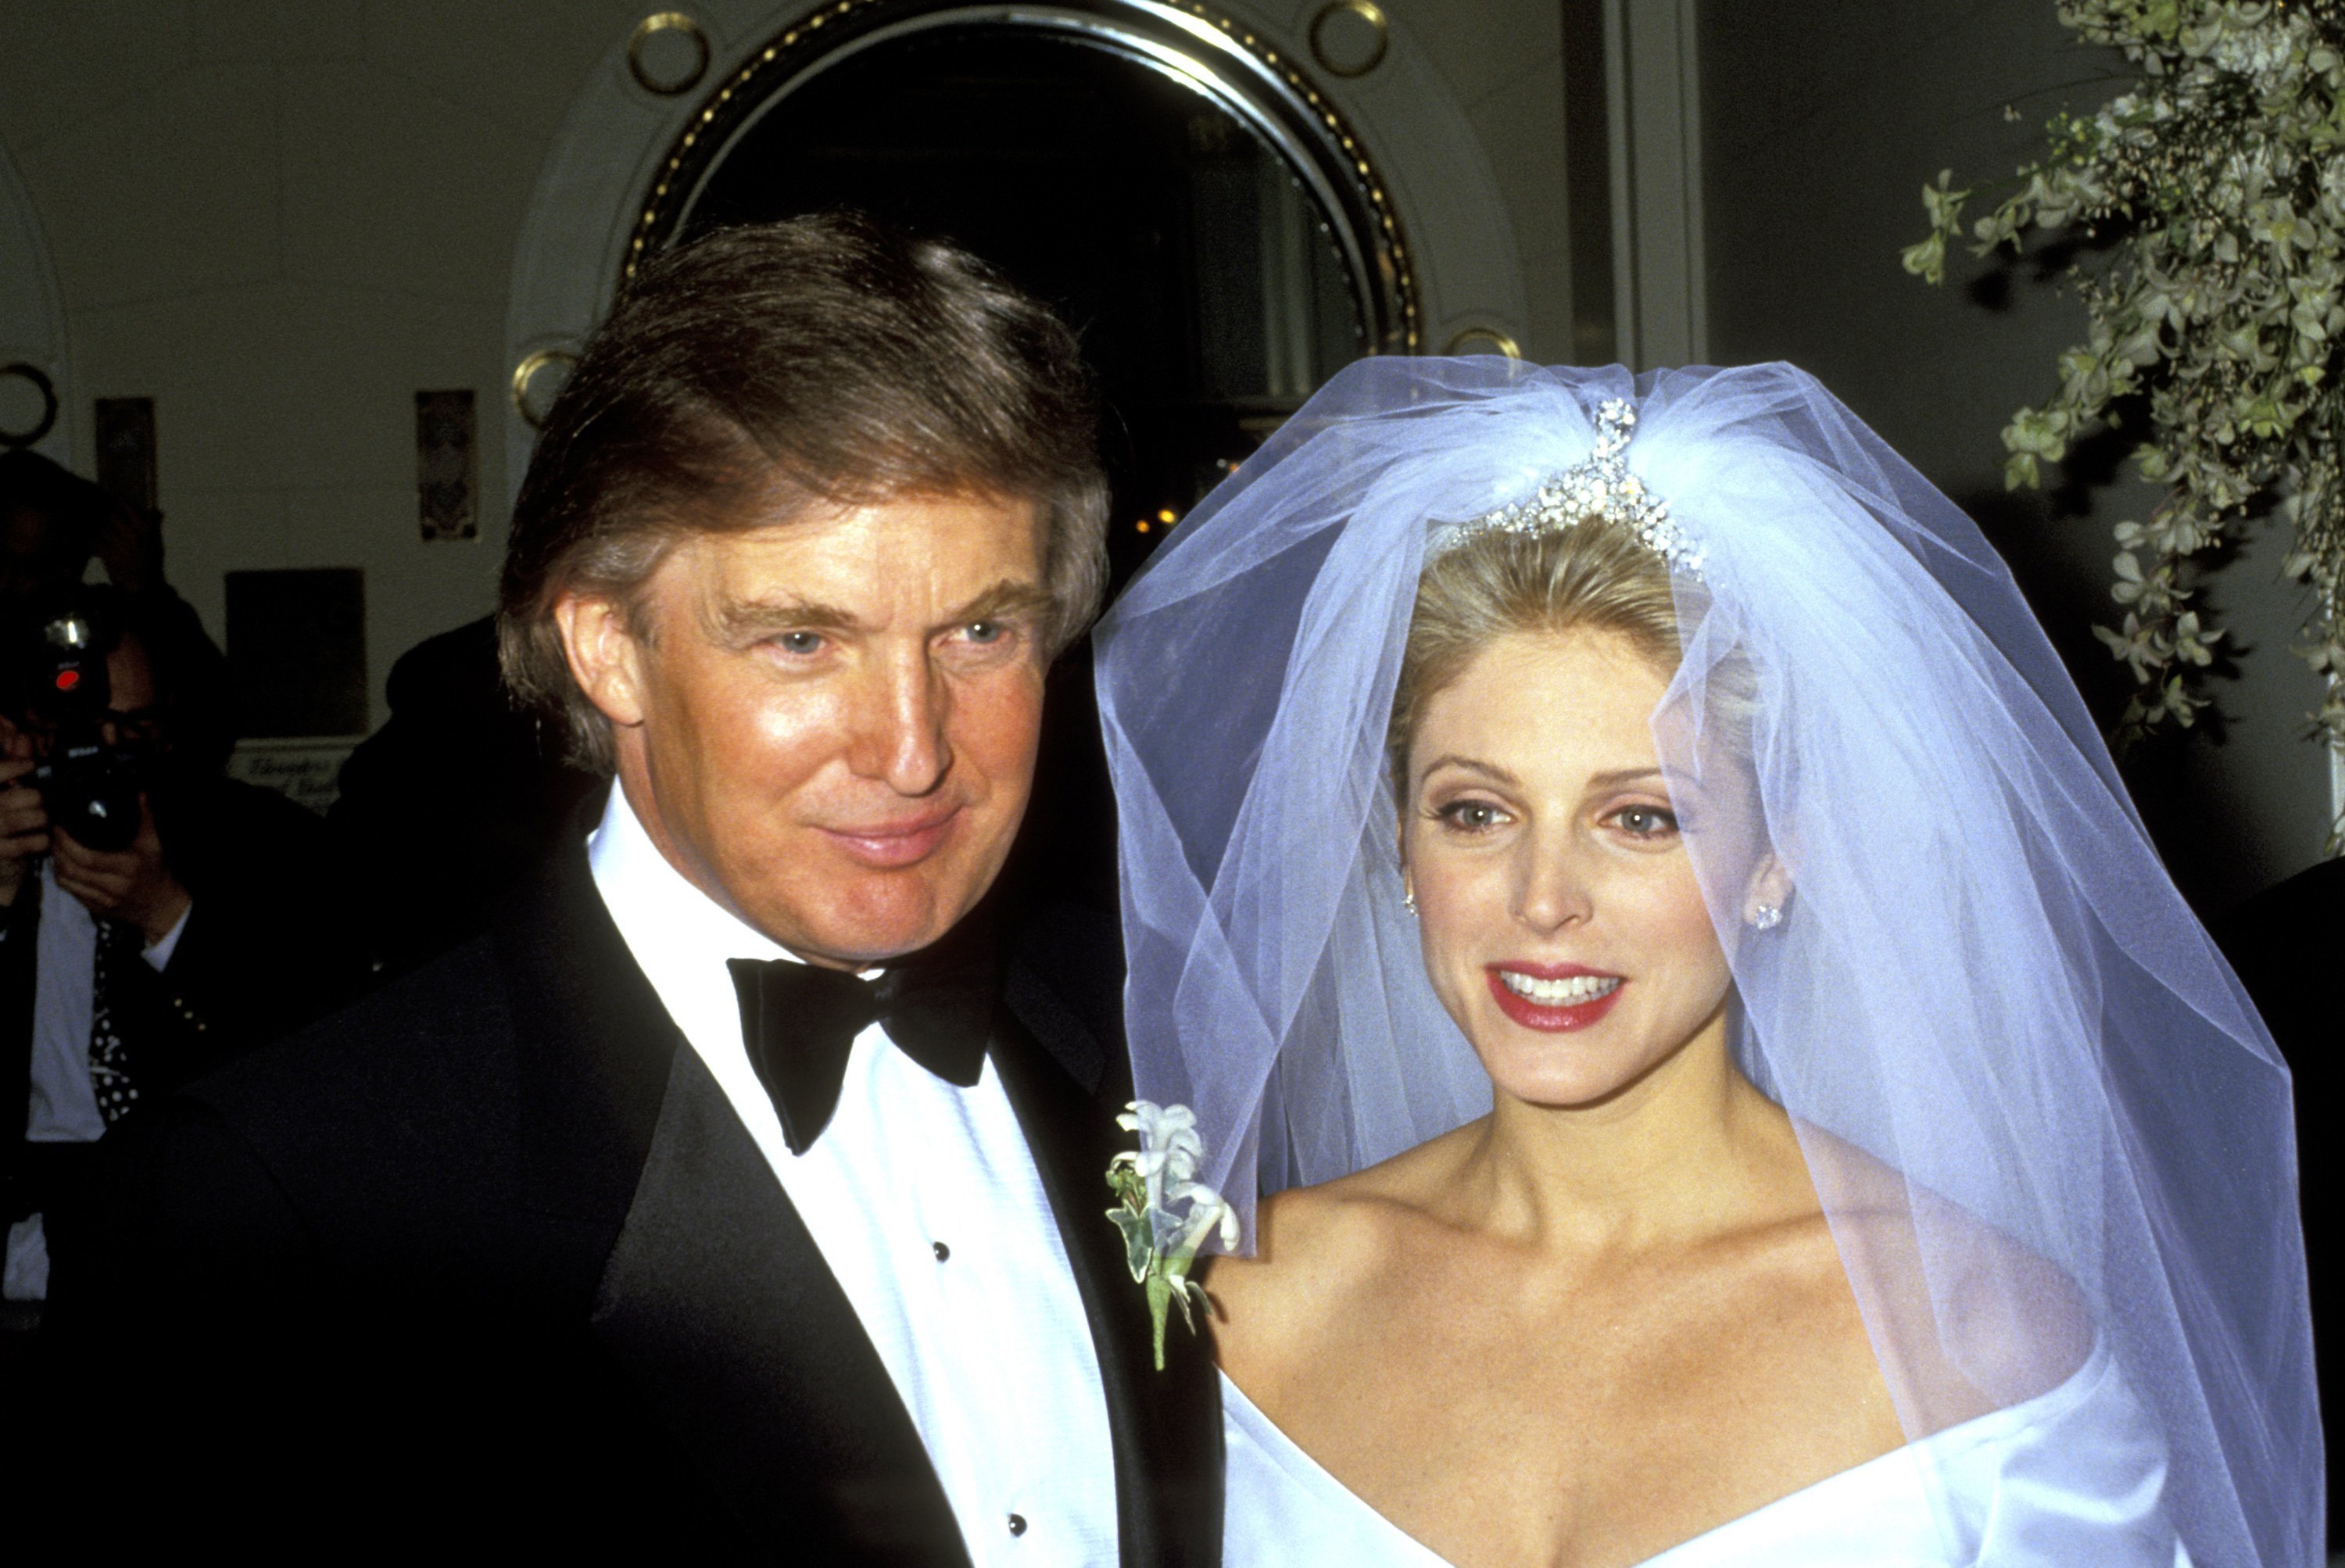 Donald Trump and Marla Maples during their Wedding, December 20, 1993 | Photo: Getty Images